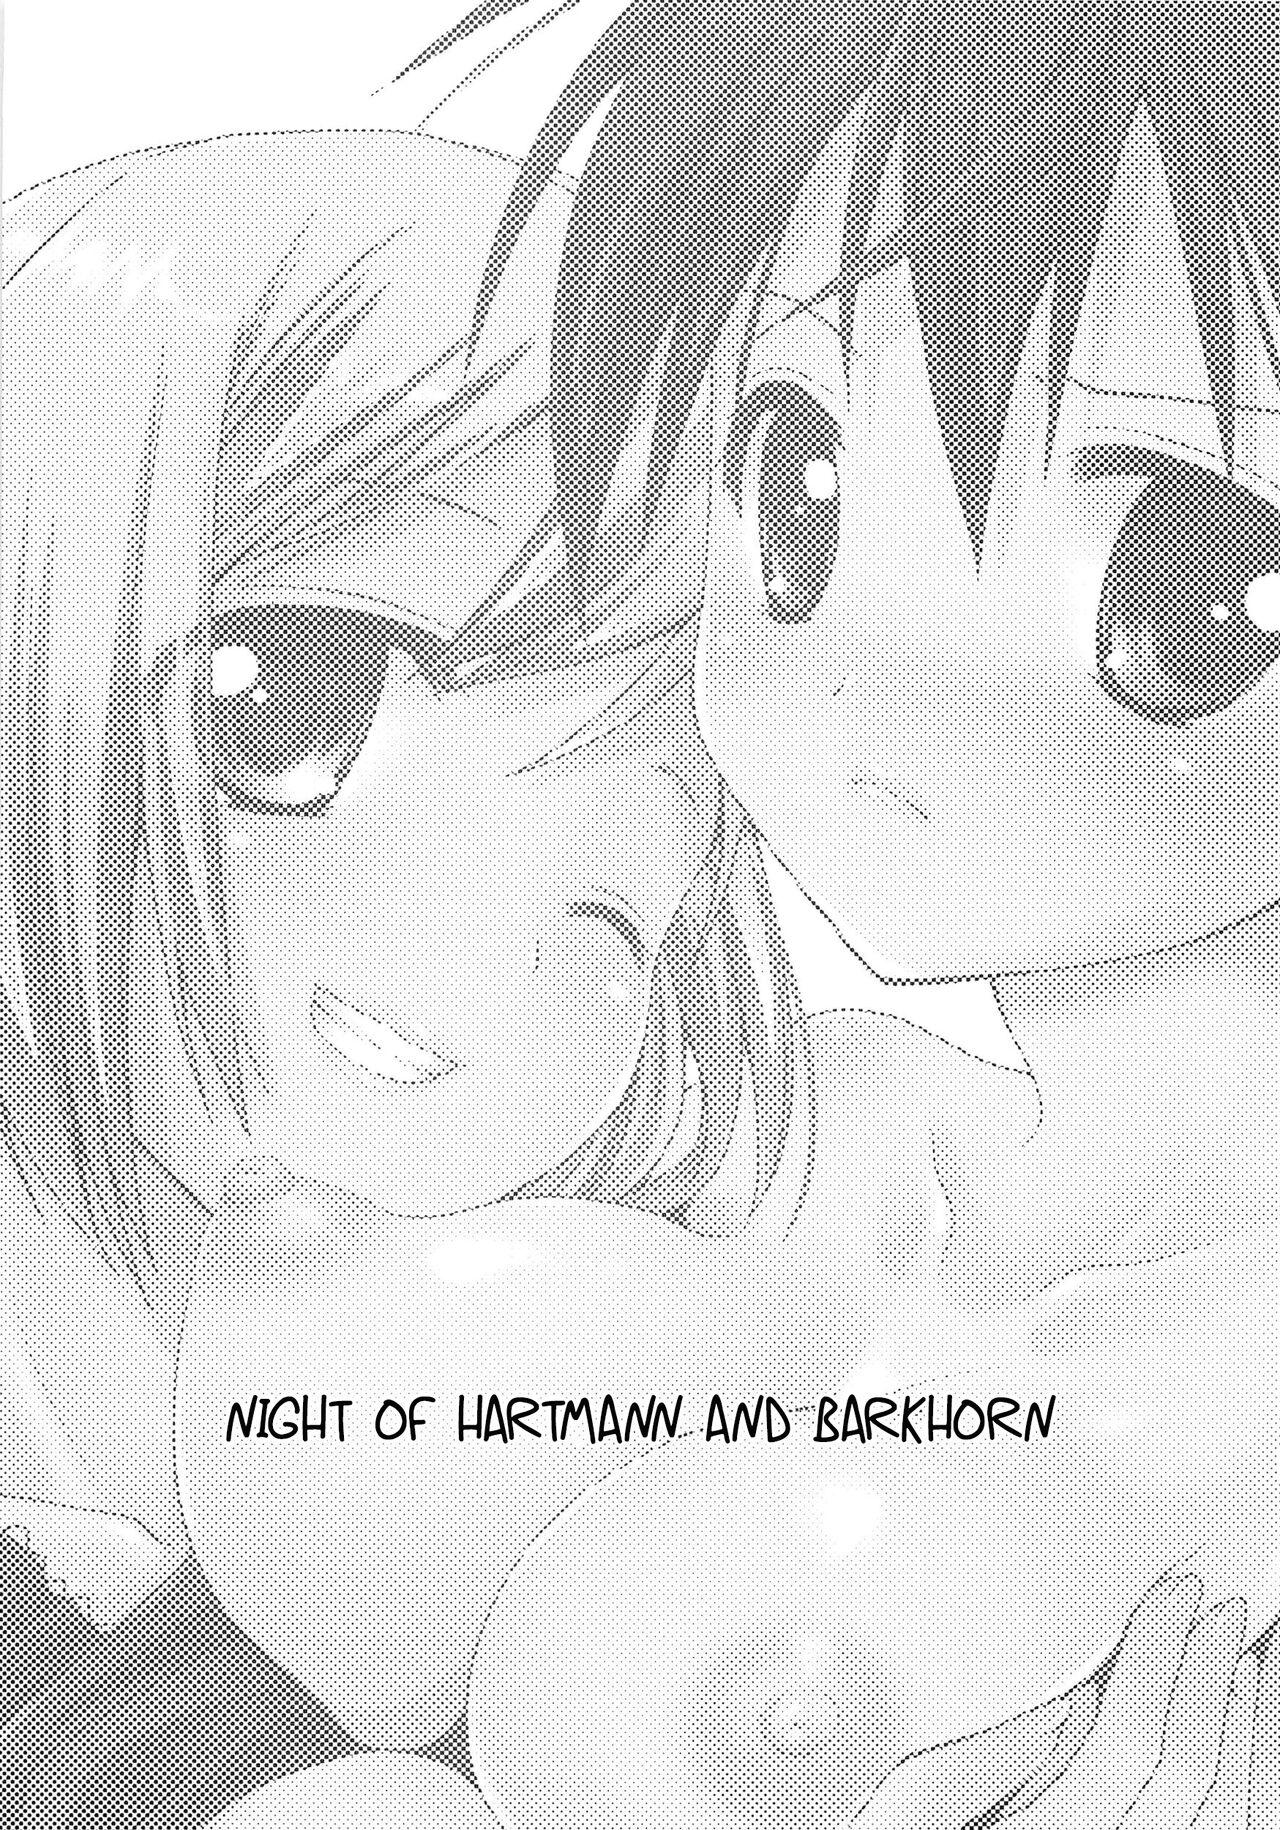 Reality Porn Hartmann to Barkhorn no Yoru | Night of Hartmann and Barkhorn - Strike witches Real Amateurs - Page 2